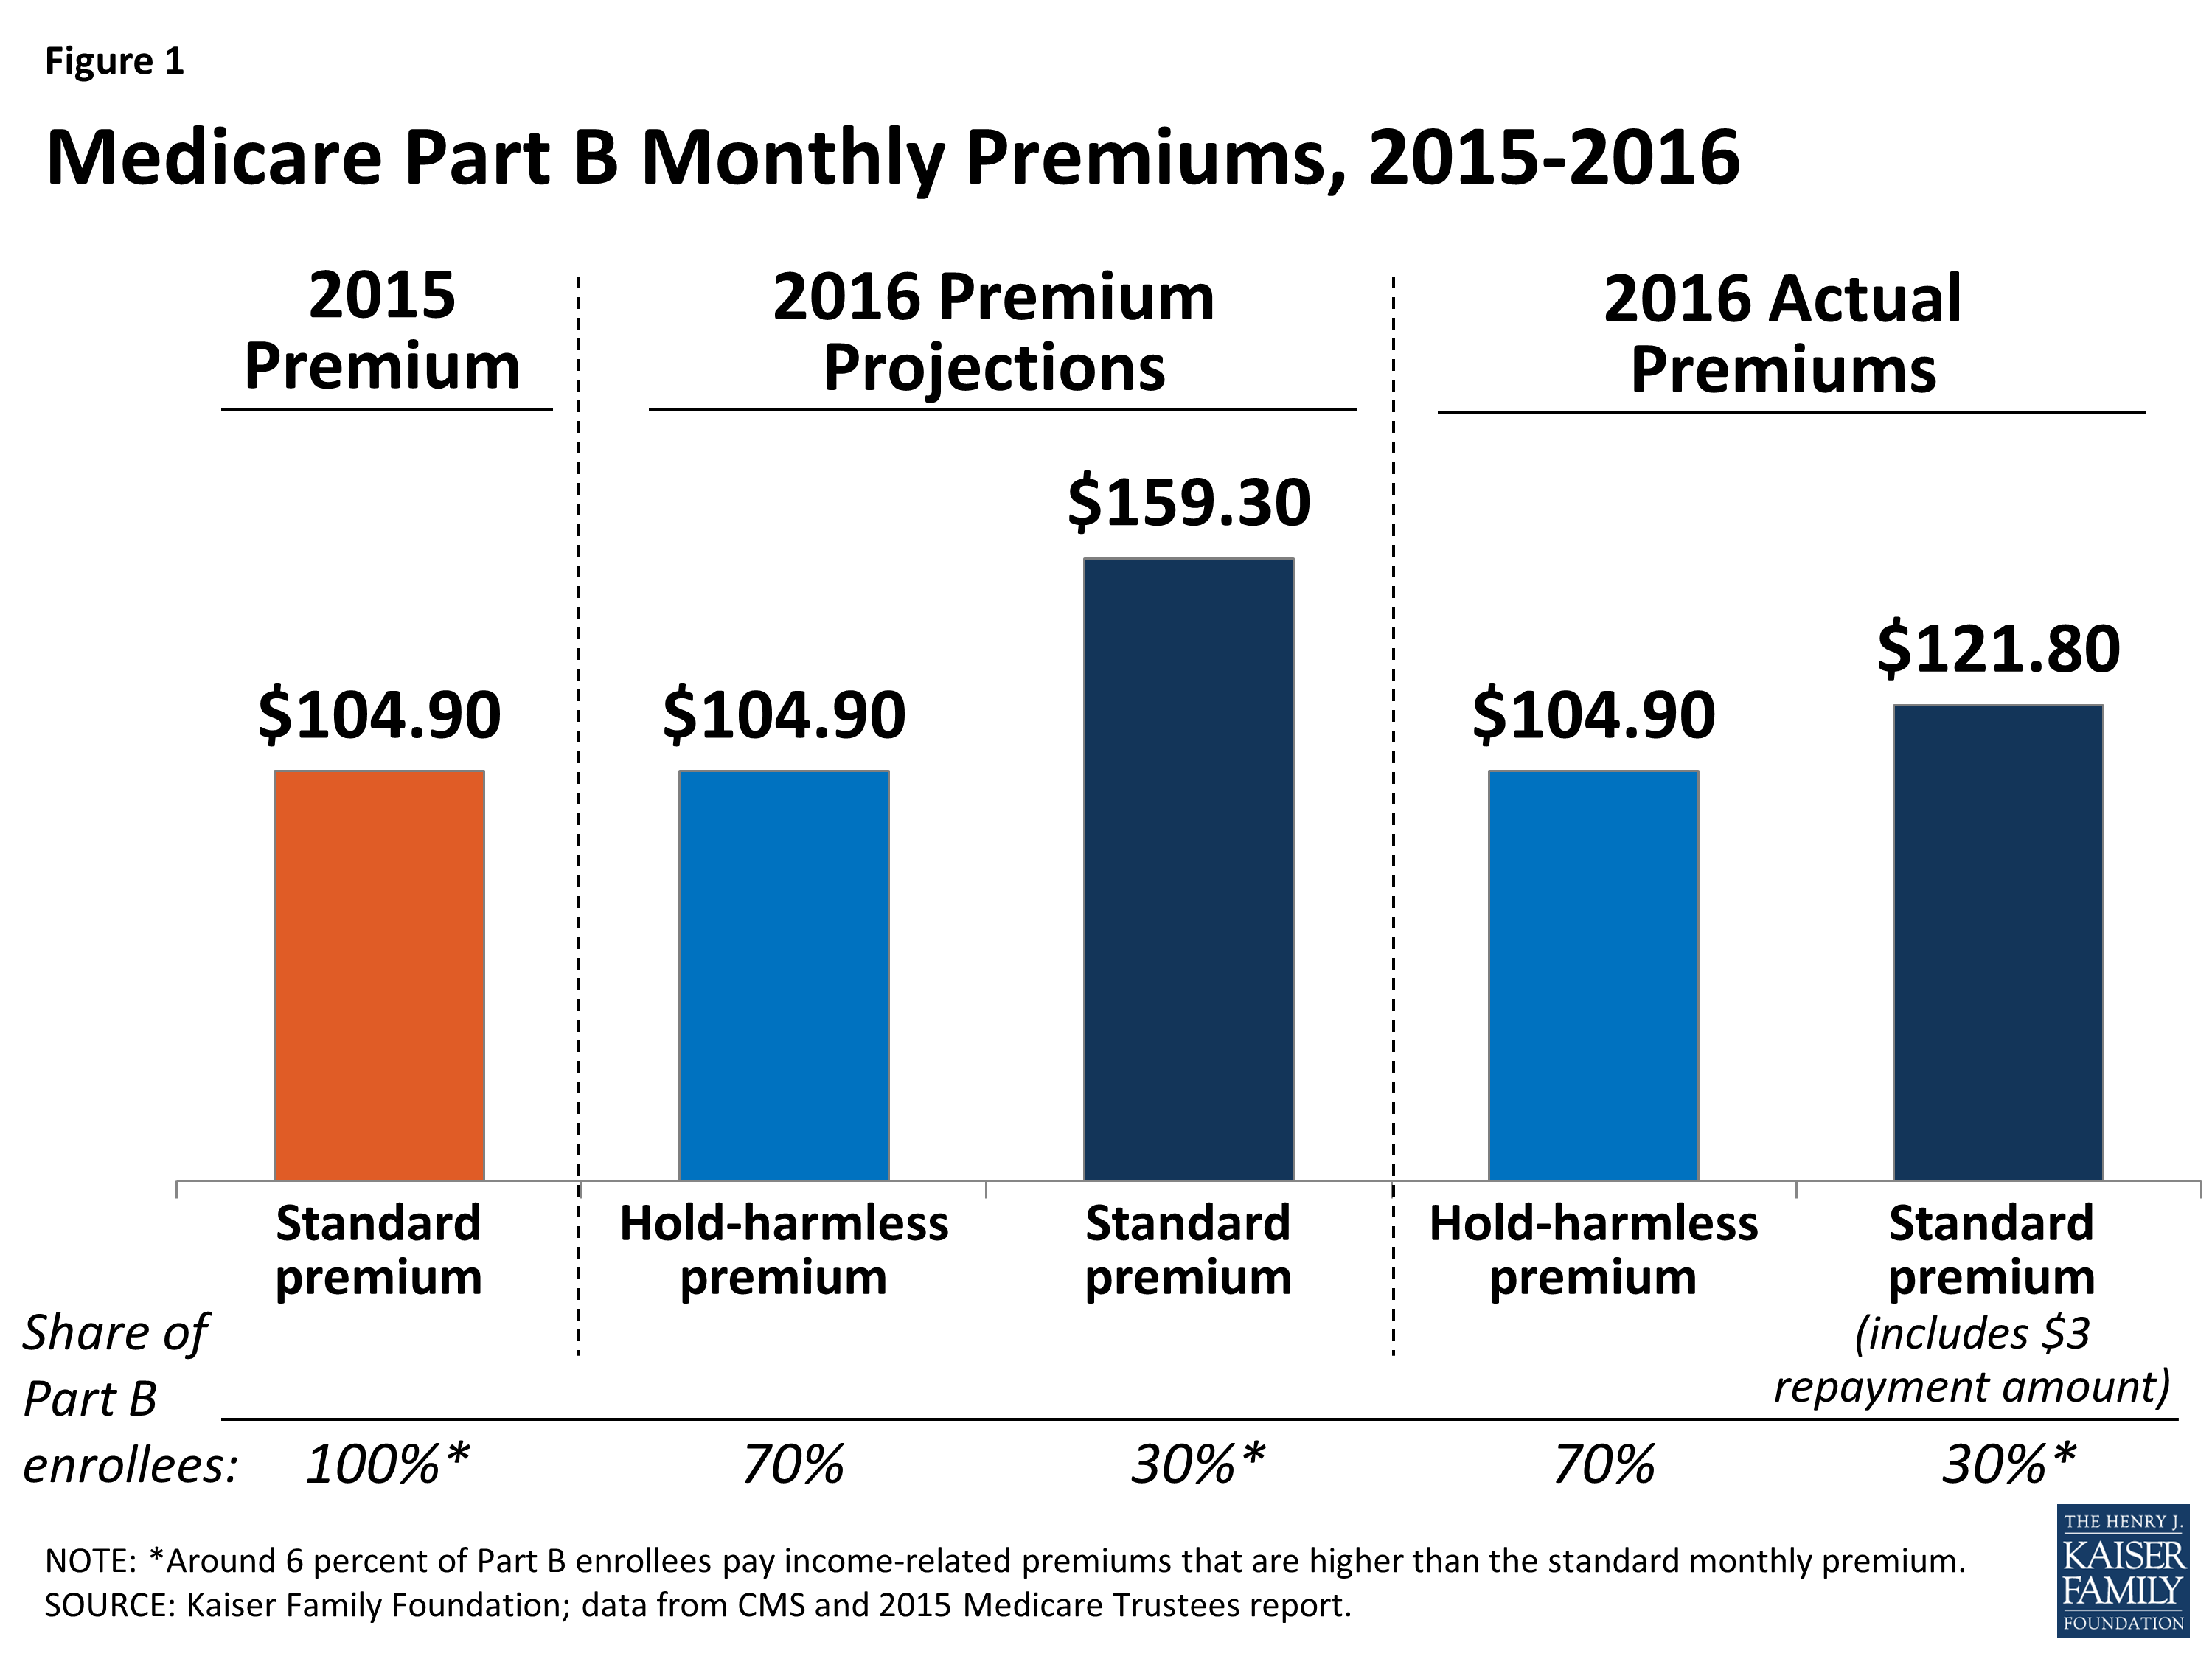 What’s in Store for Medicare’s Part B Premiums and Deductible in 2016